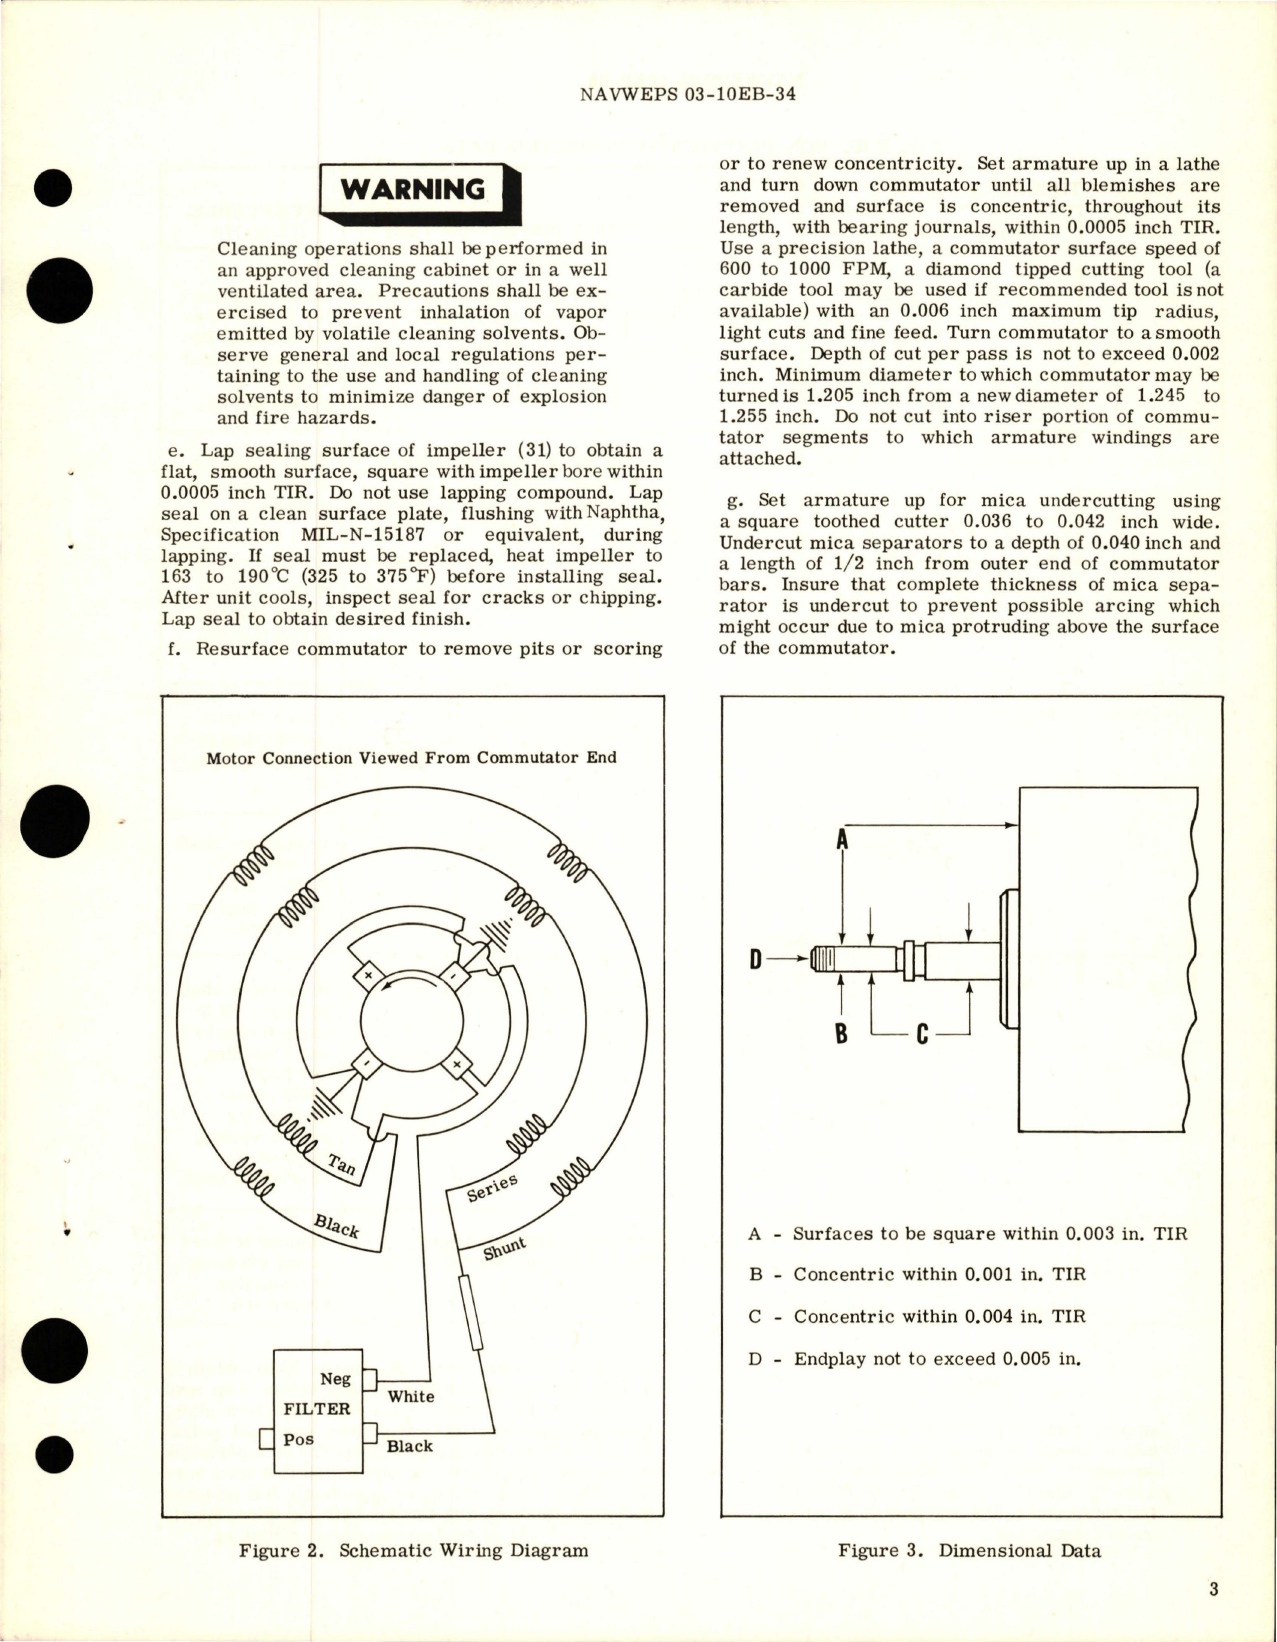 Sample page 5 from AirCorps Library document: Overhaul Instructions with Parts Breakdown for Fuel Booster Pump - Model RR11810B1